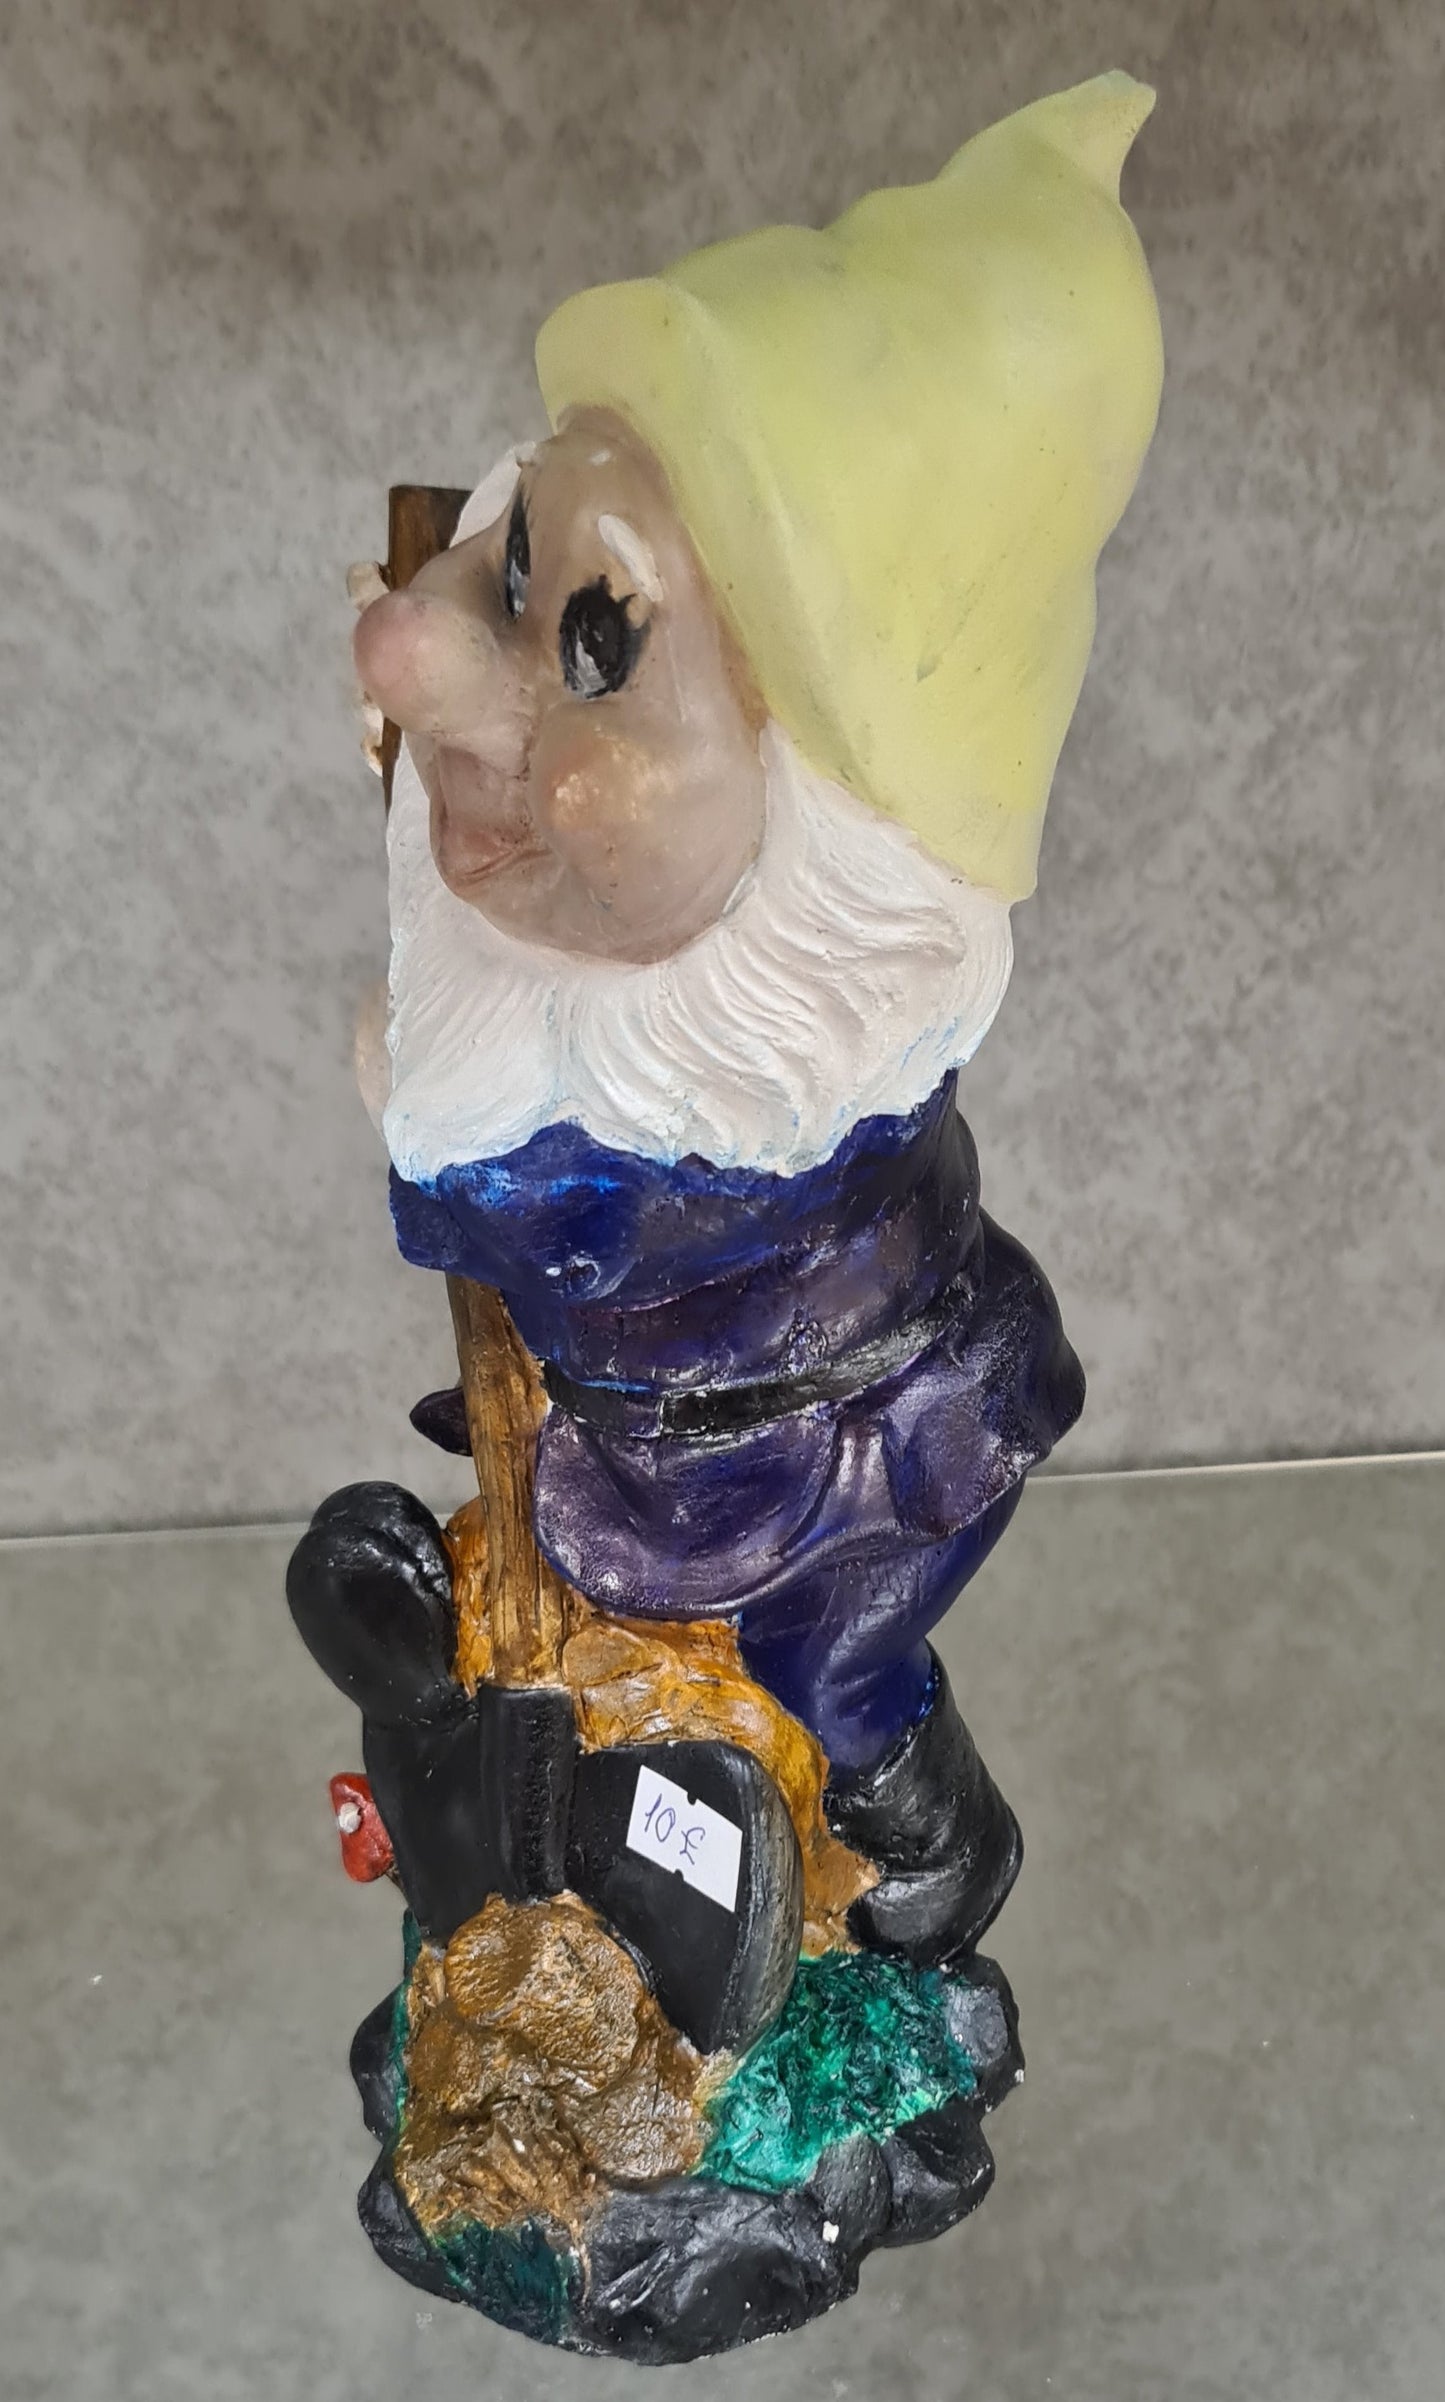 Enchanted Guardian Gnome, a customized whimsical masterpiece from Candle Gnome